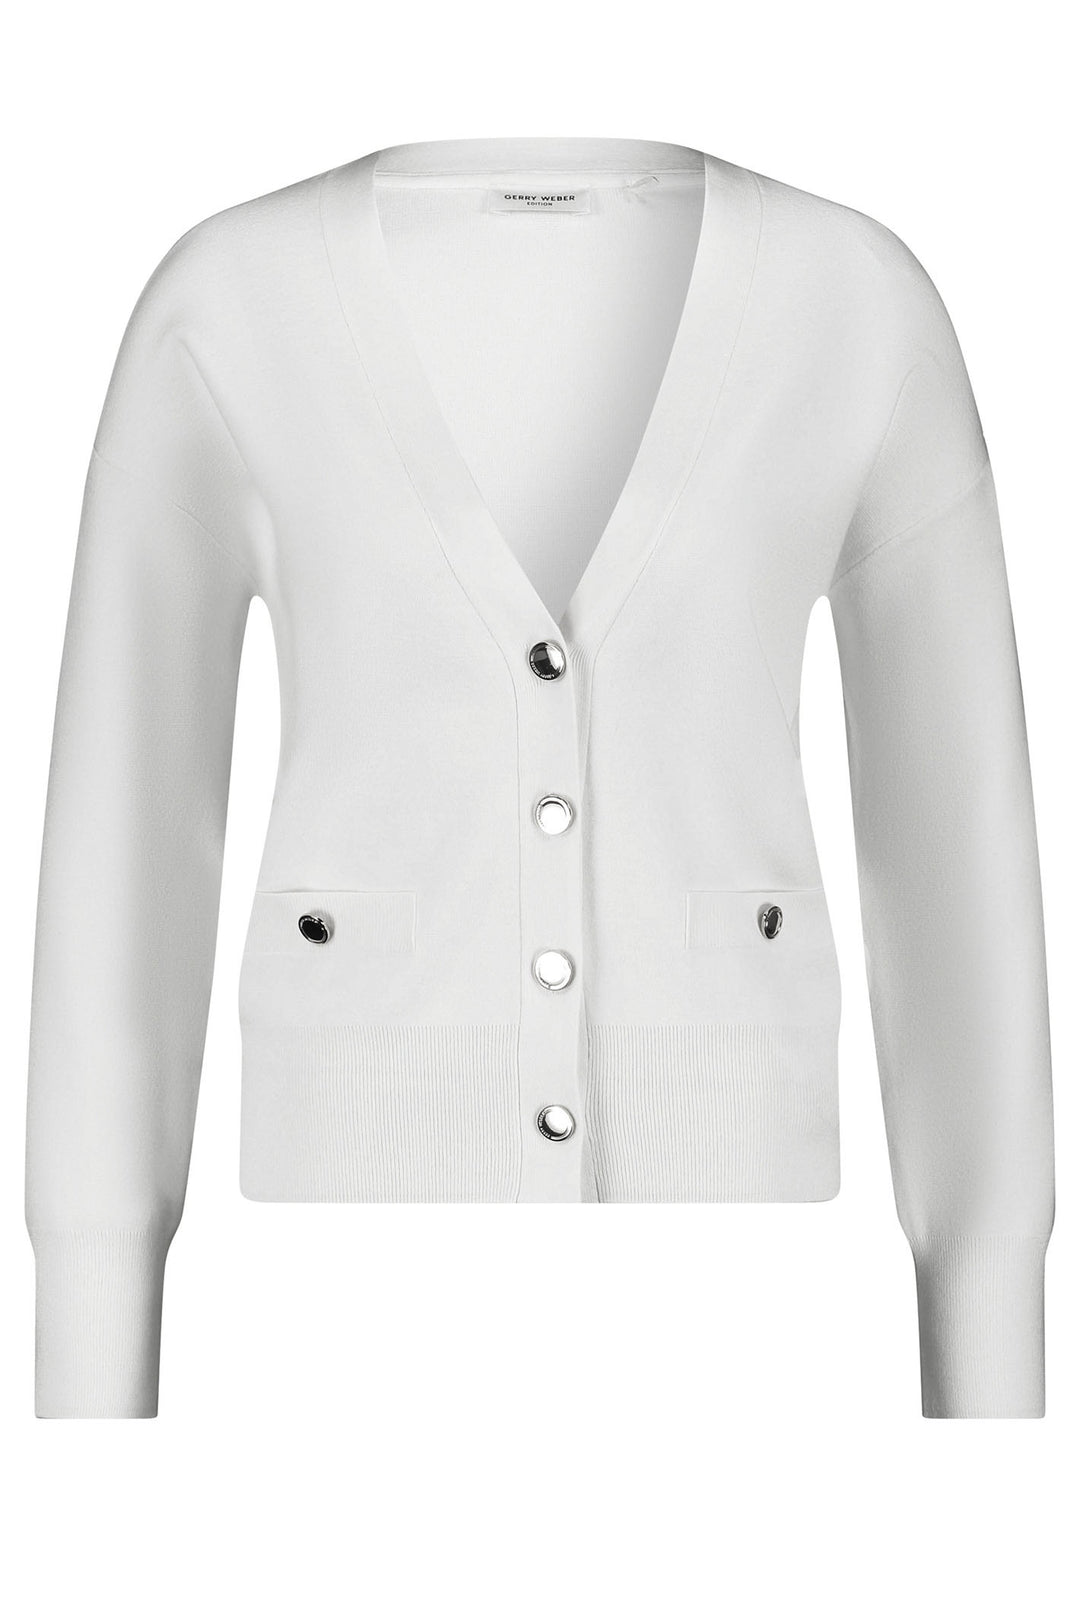 Gerry Weber 230202 99700 Off White Knitted Cardigan Jacket - Experience Boutique